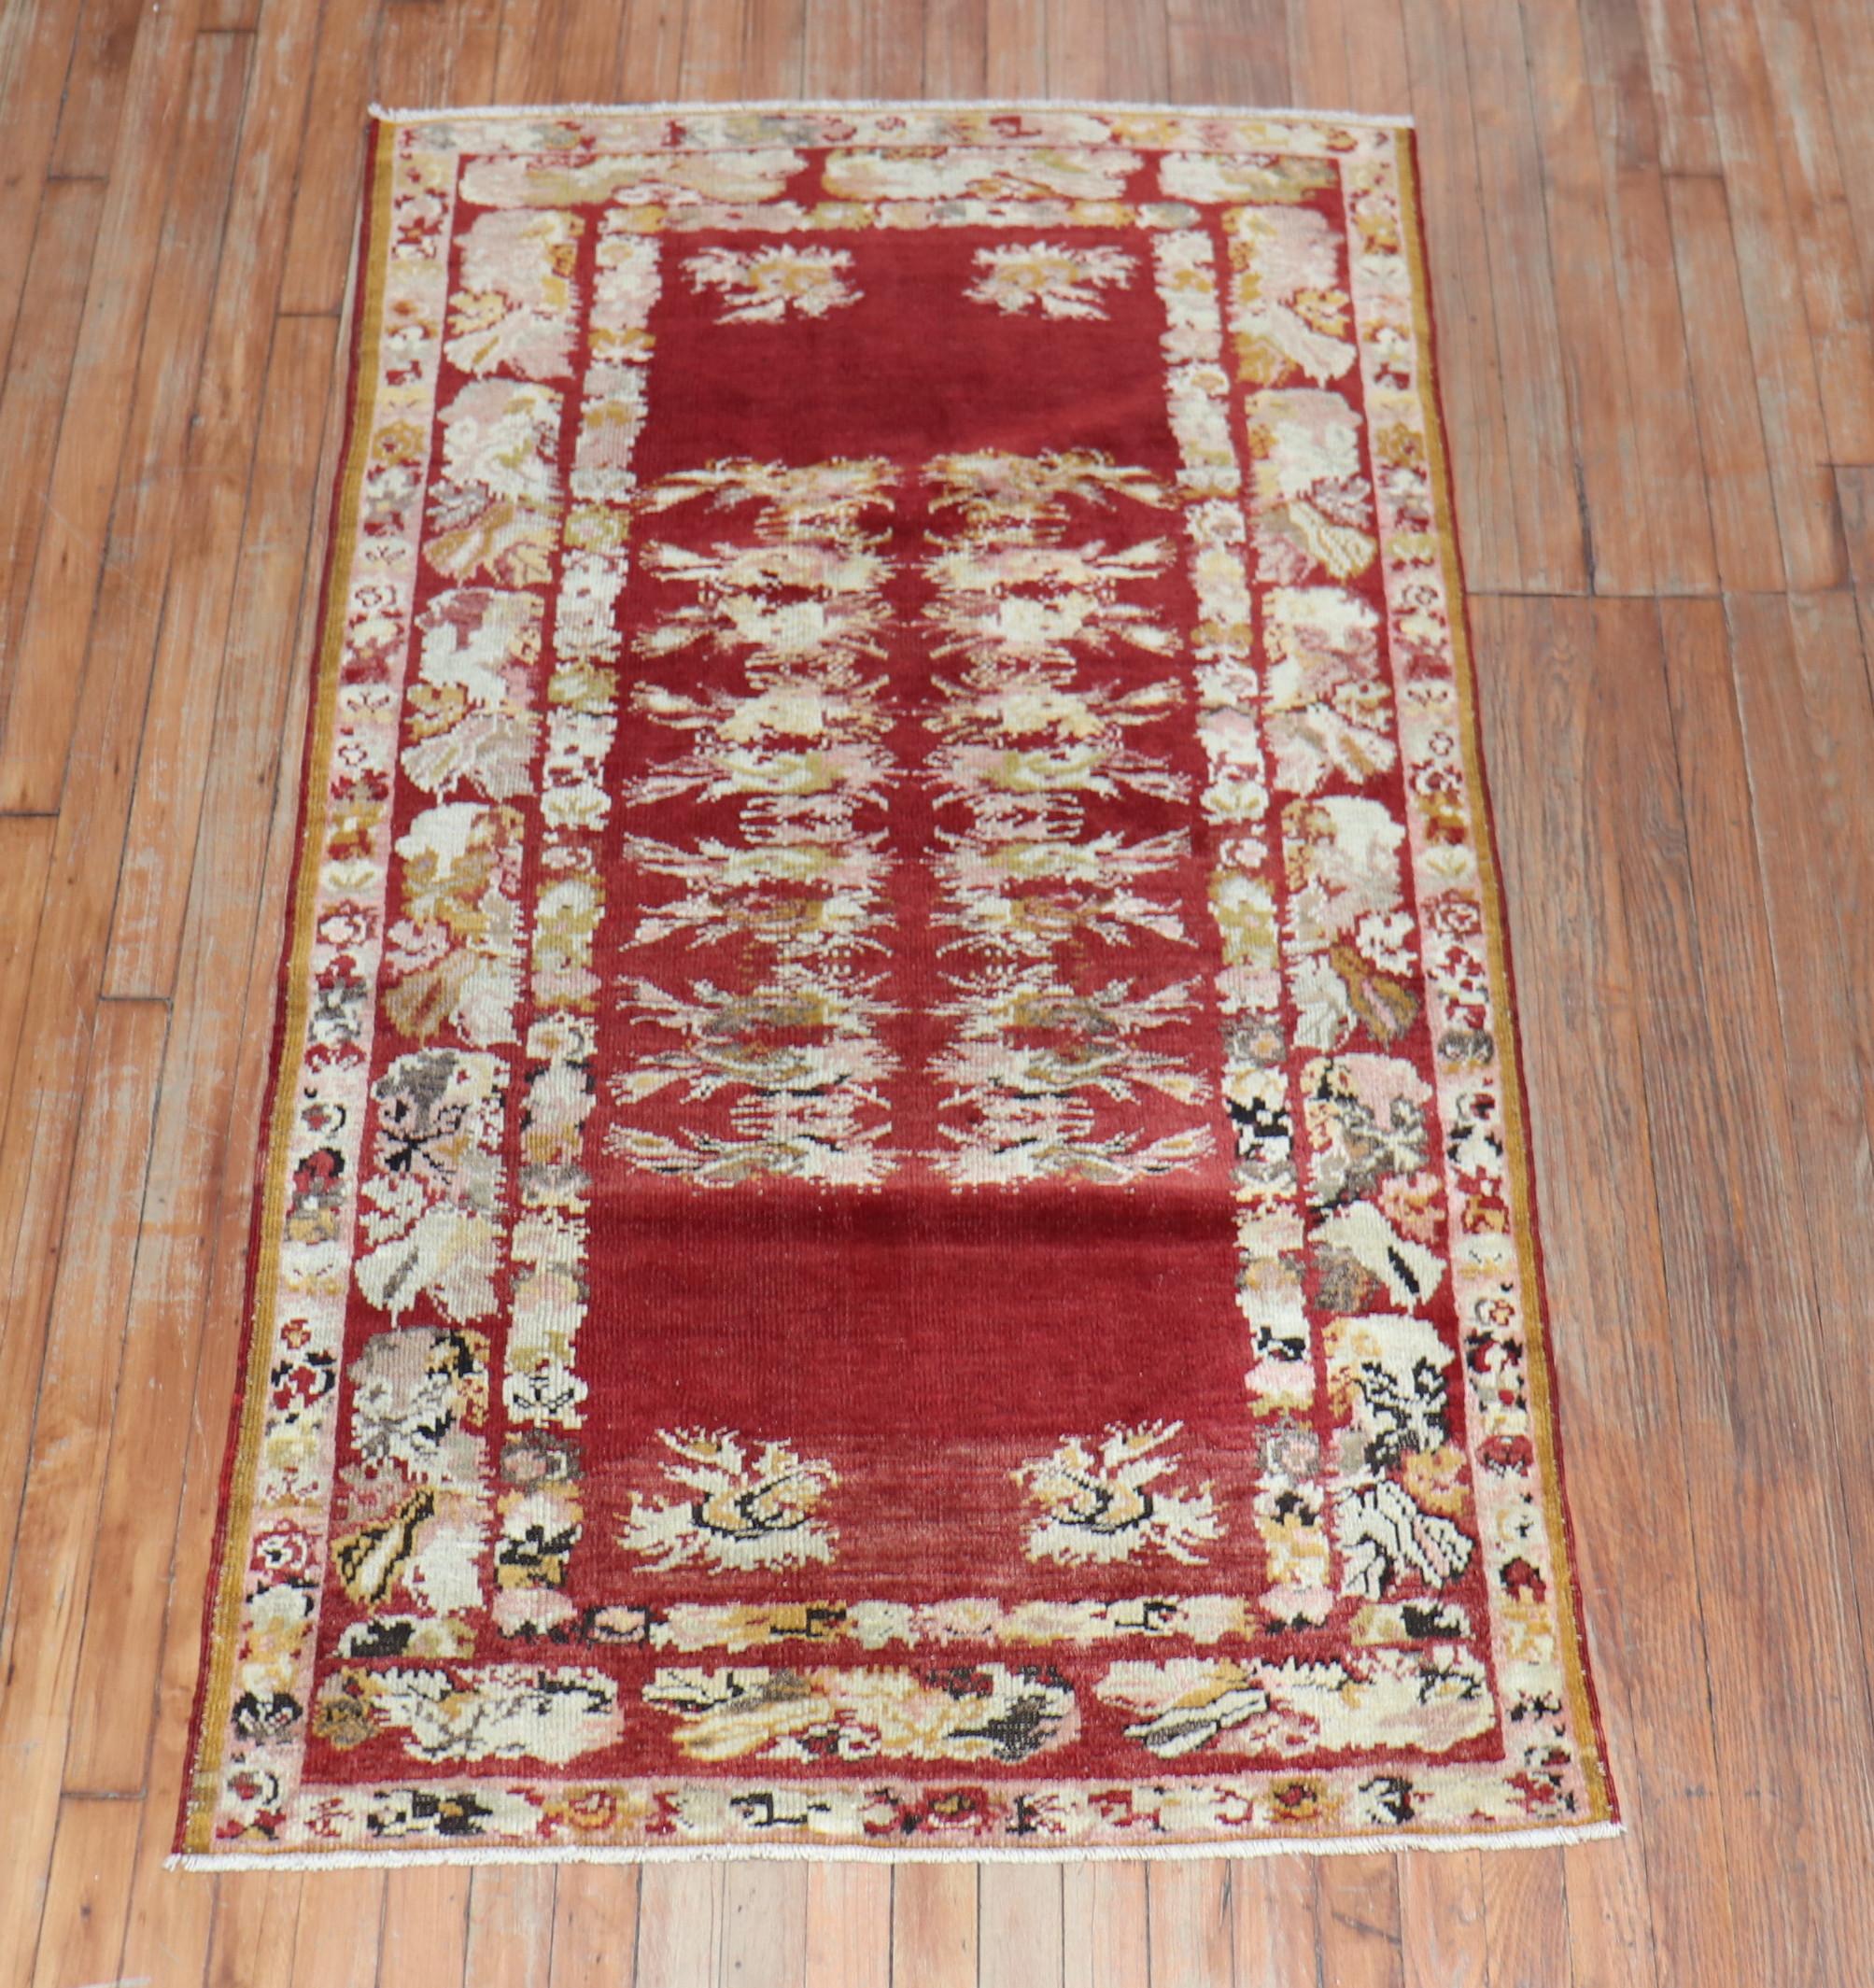 A finely woven Turkish rug executed with pristine jewel-tone colors. A cherry red open field spacious motif. The floral elegantly flows with the rest of the motif. The craftsmanship on this is superb. Might even be a great wall piece.

Measures: